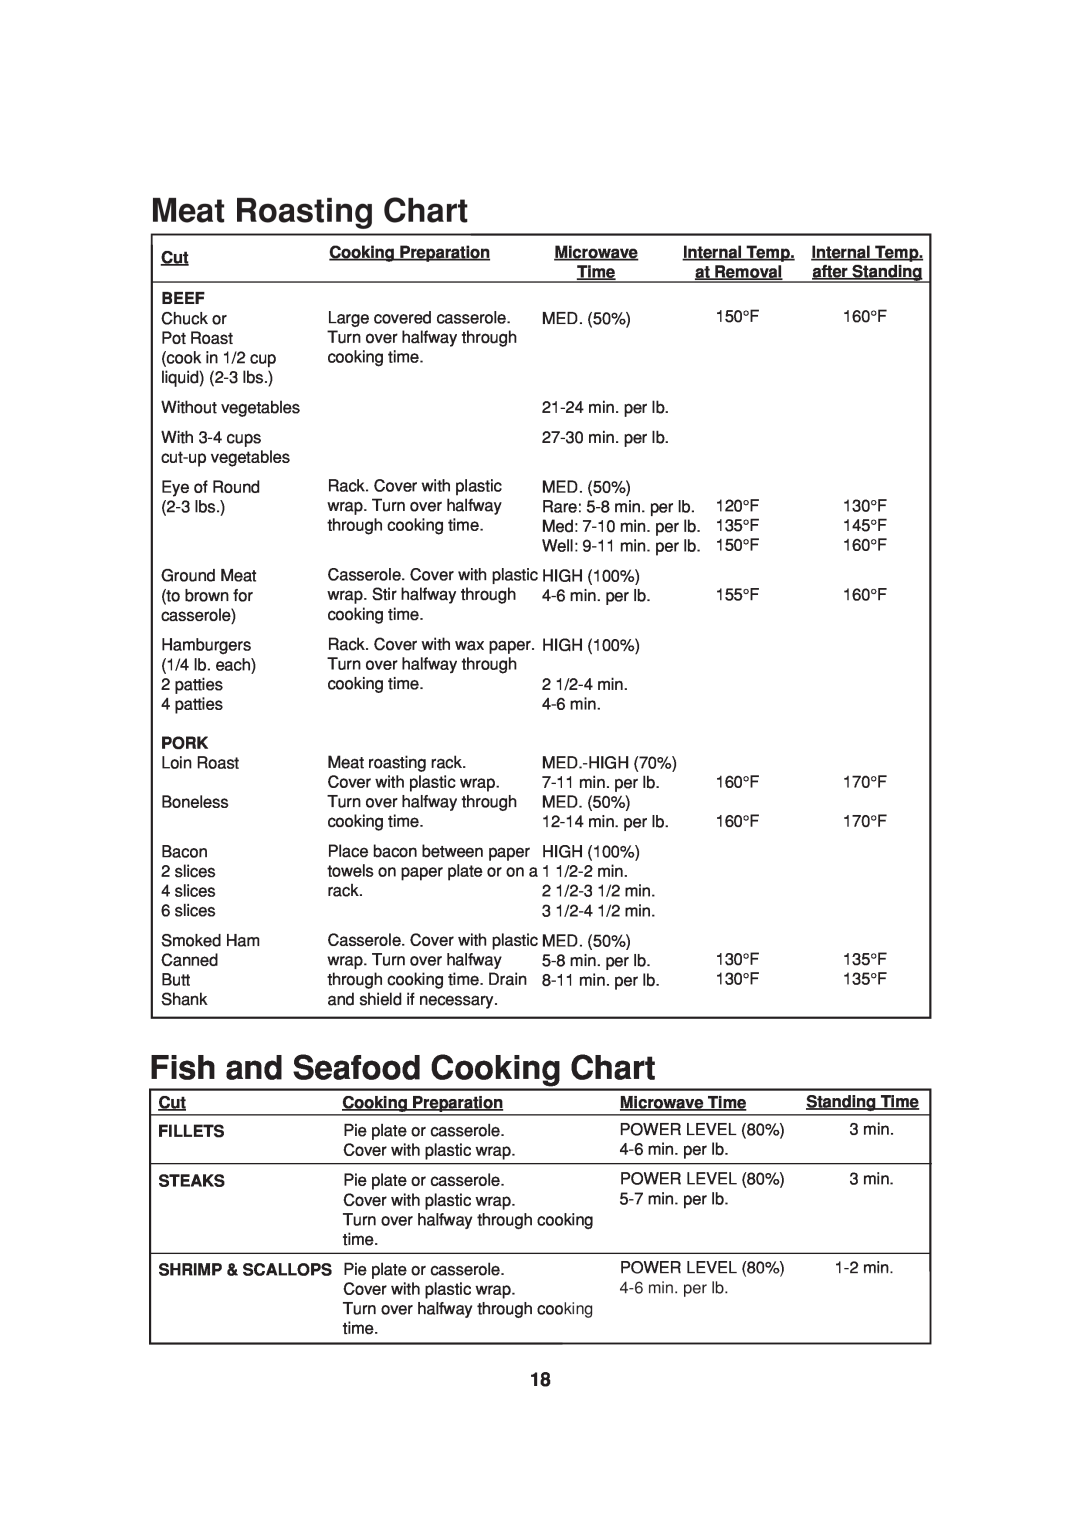 Sharp R-308A, R-312A, R-305A, R-309B, R-310A, R-305B operation manual Meat Roasting Chart, Fish and Seafood Cooking Chart 